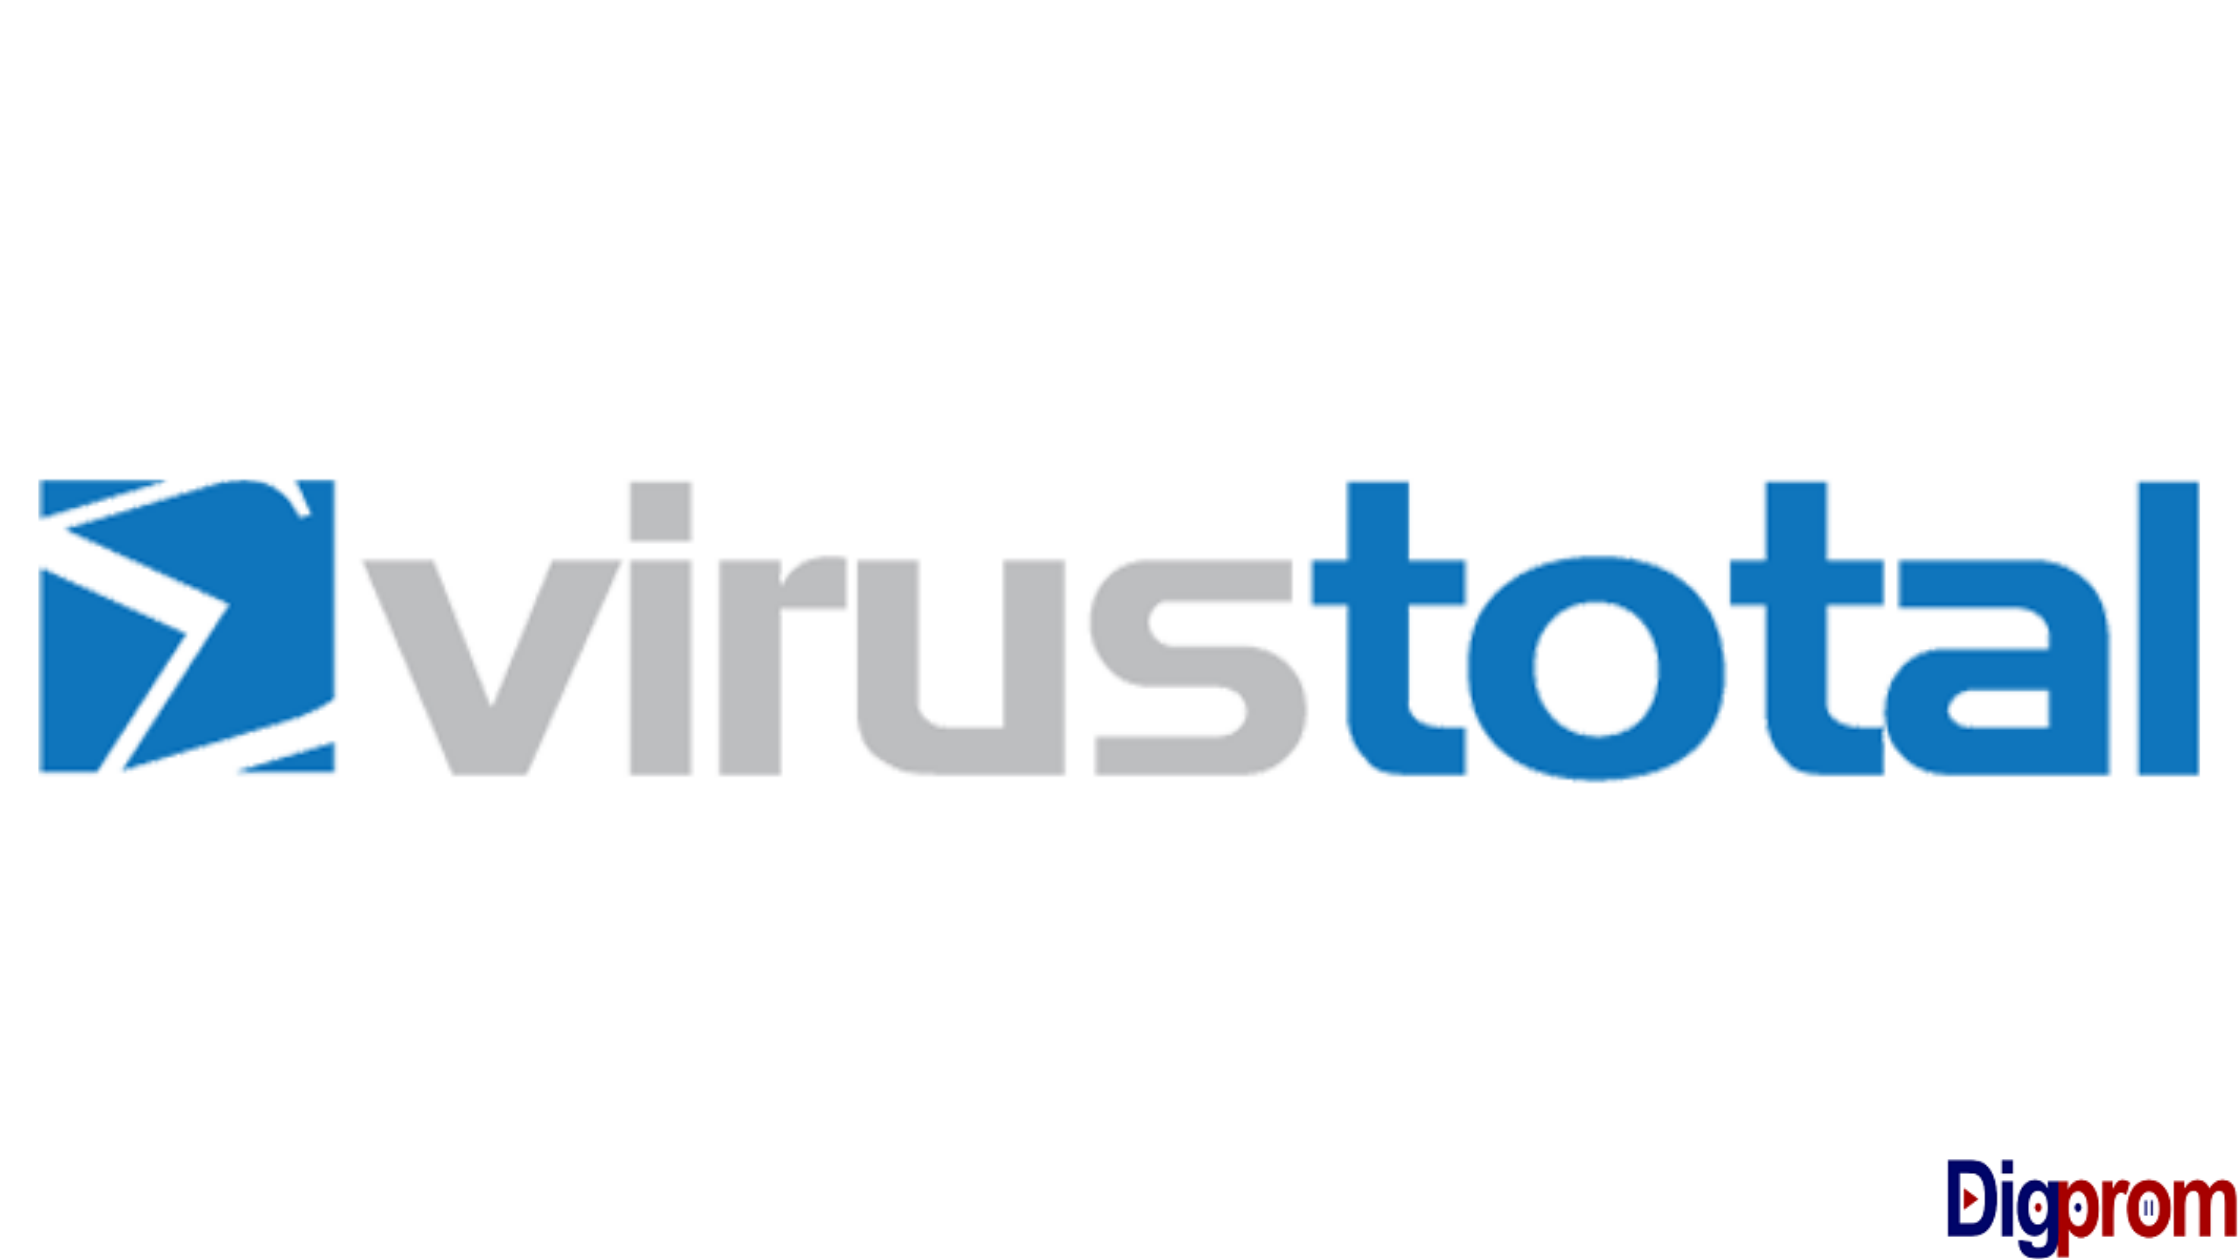 VirusTotal: A complete guide to protecting your devices against viruses with VirusTotal